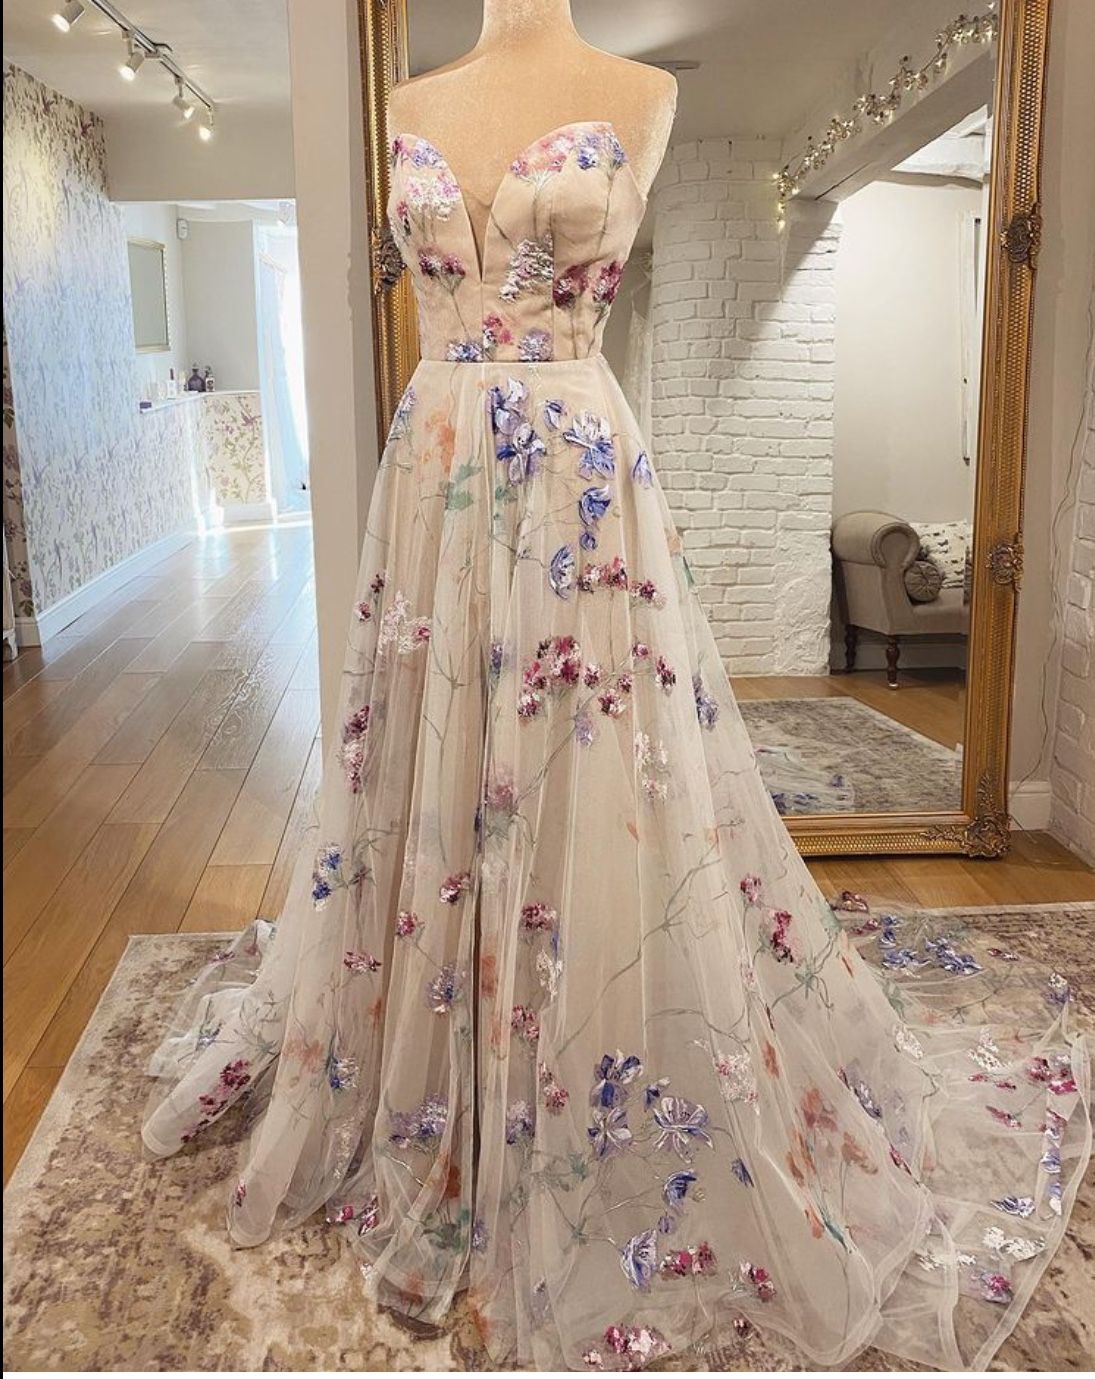 Beautiful Floral Dresses That Will Take
Your Breath Away